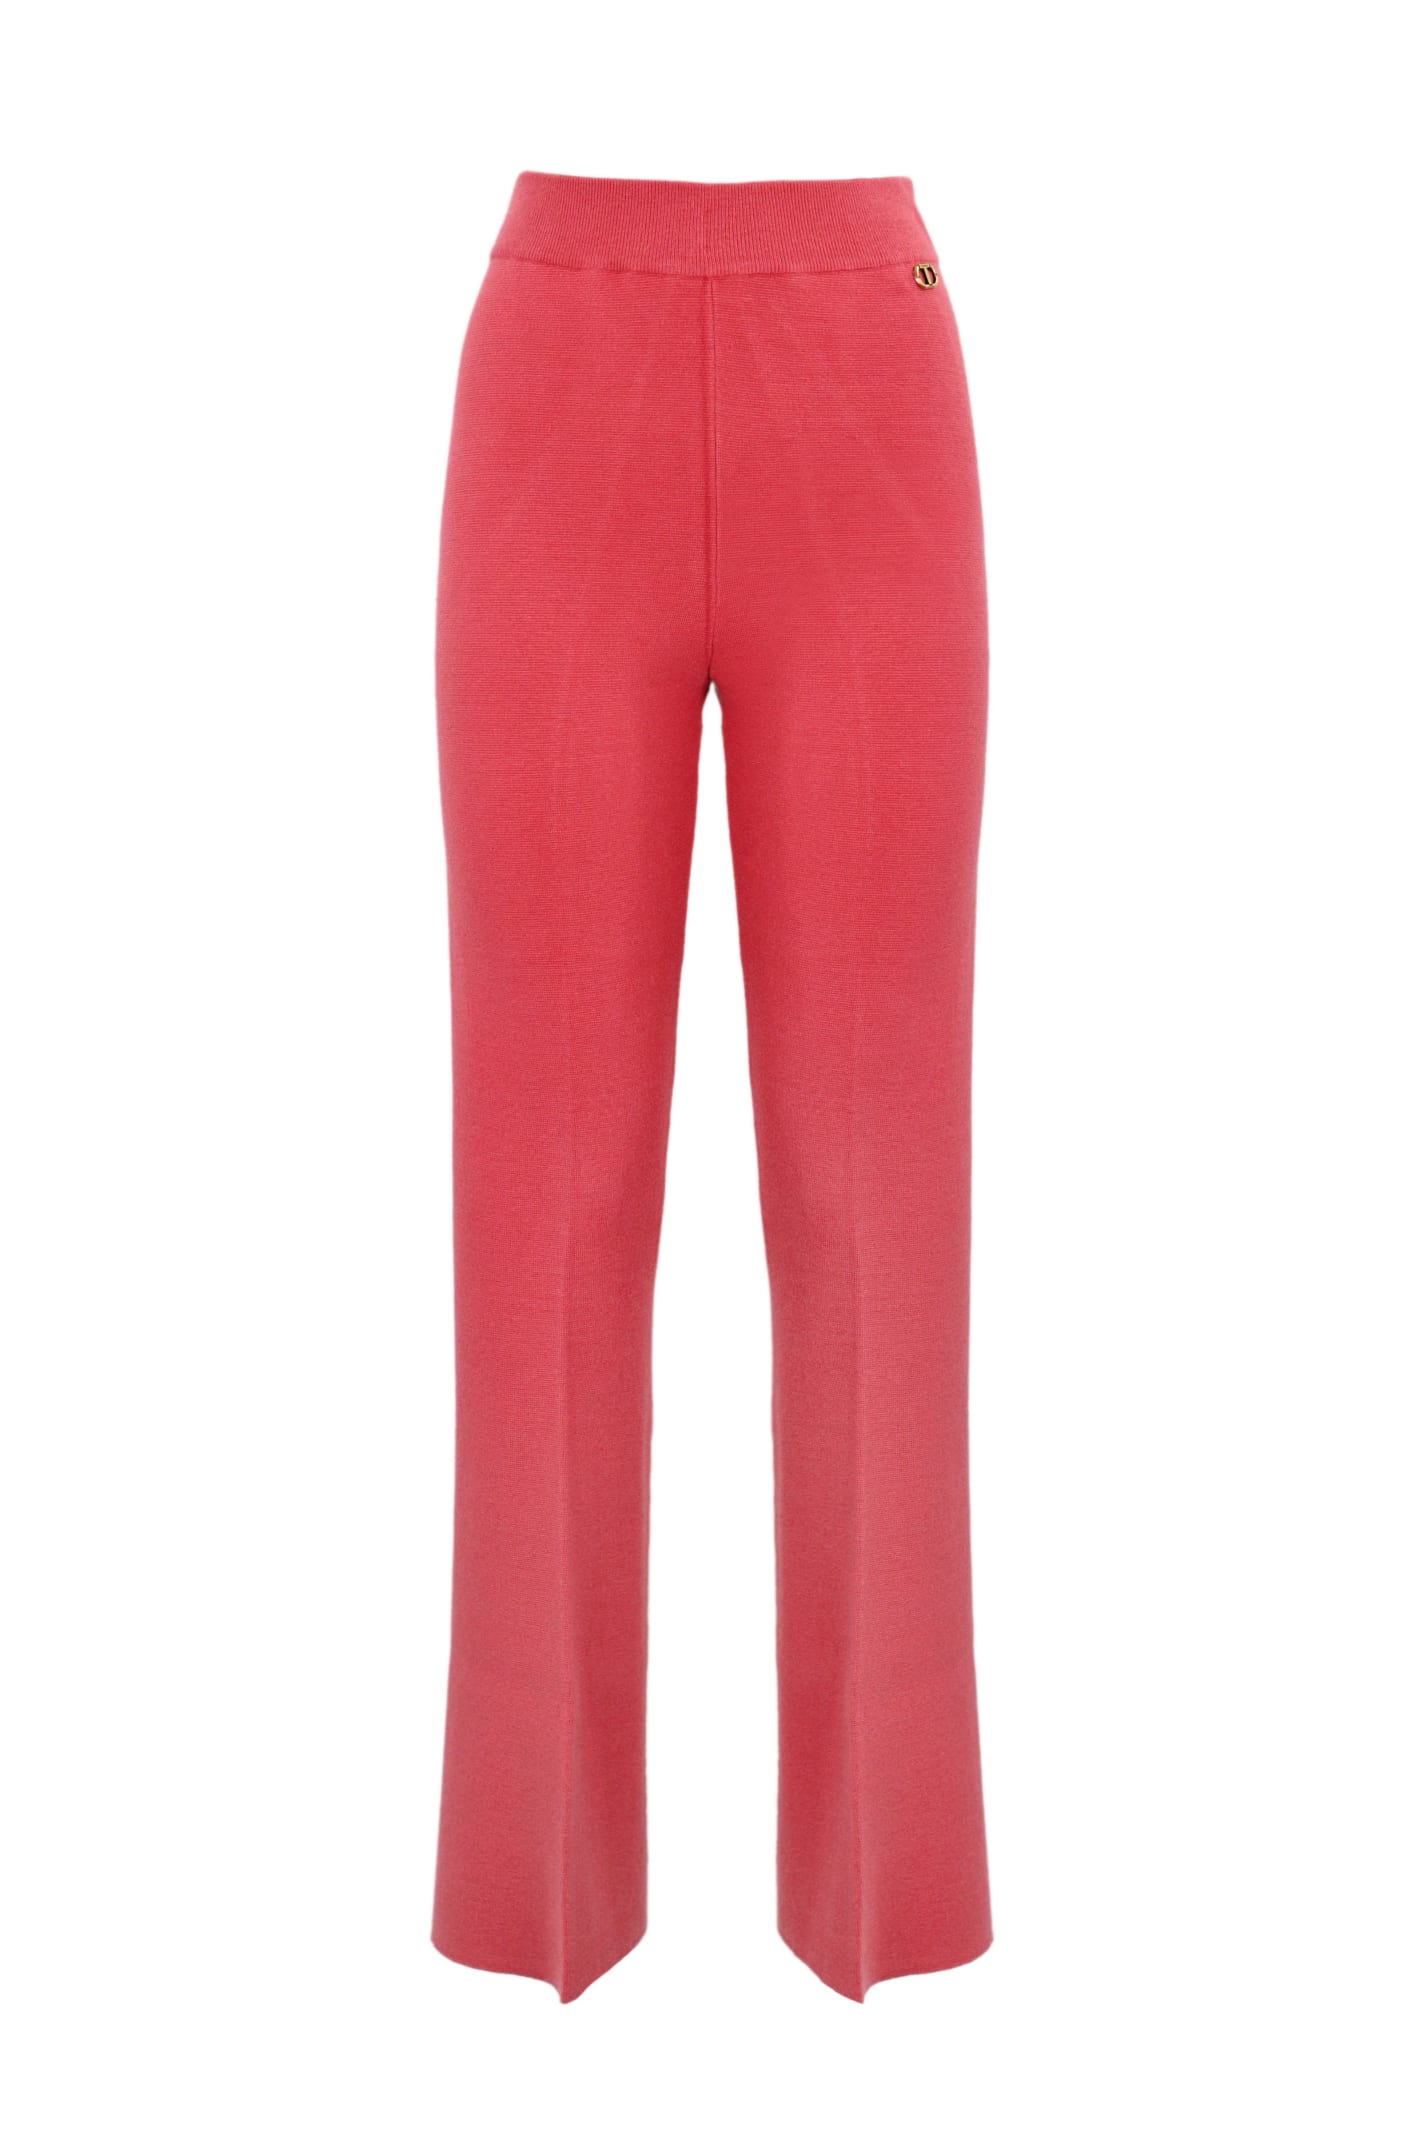 TWINSET VISCOSE BLEND TROUSERS